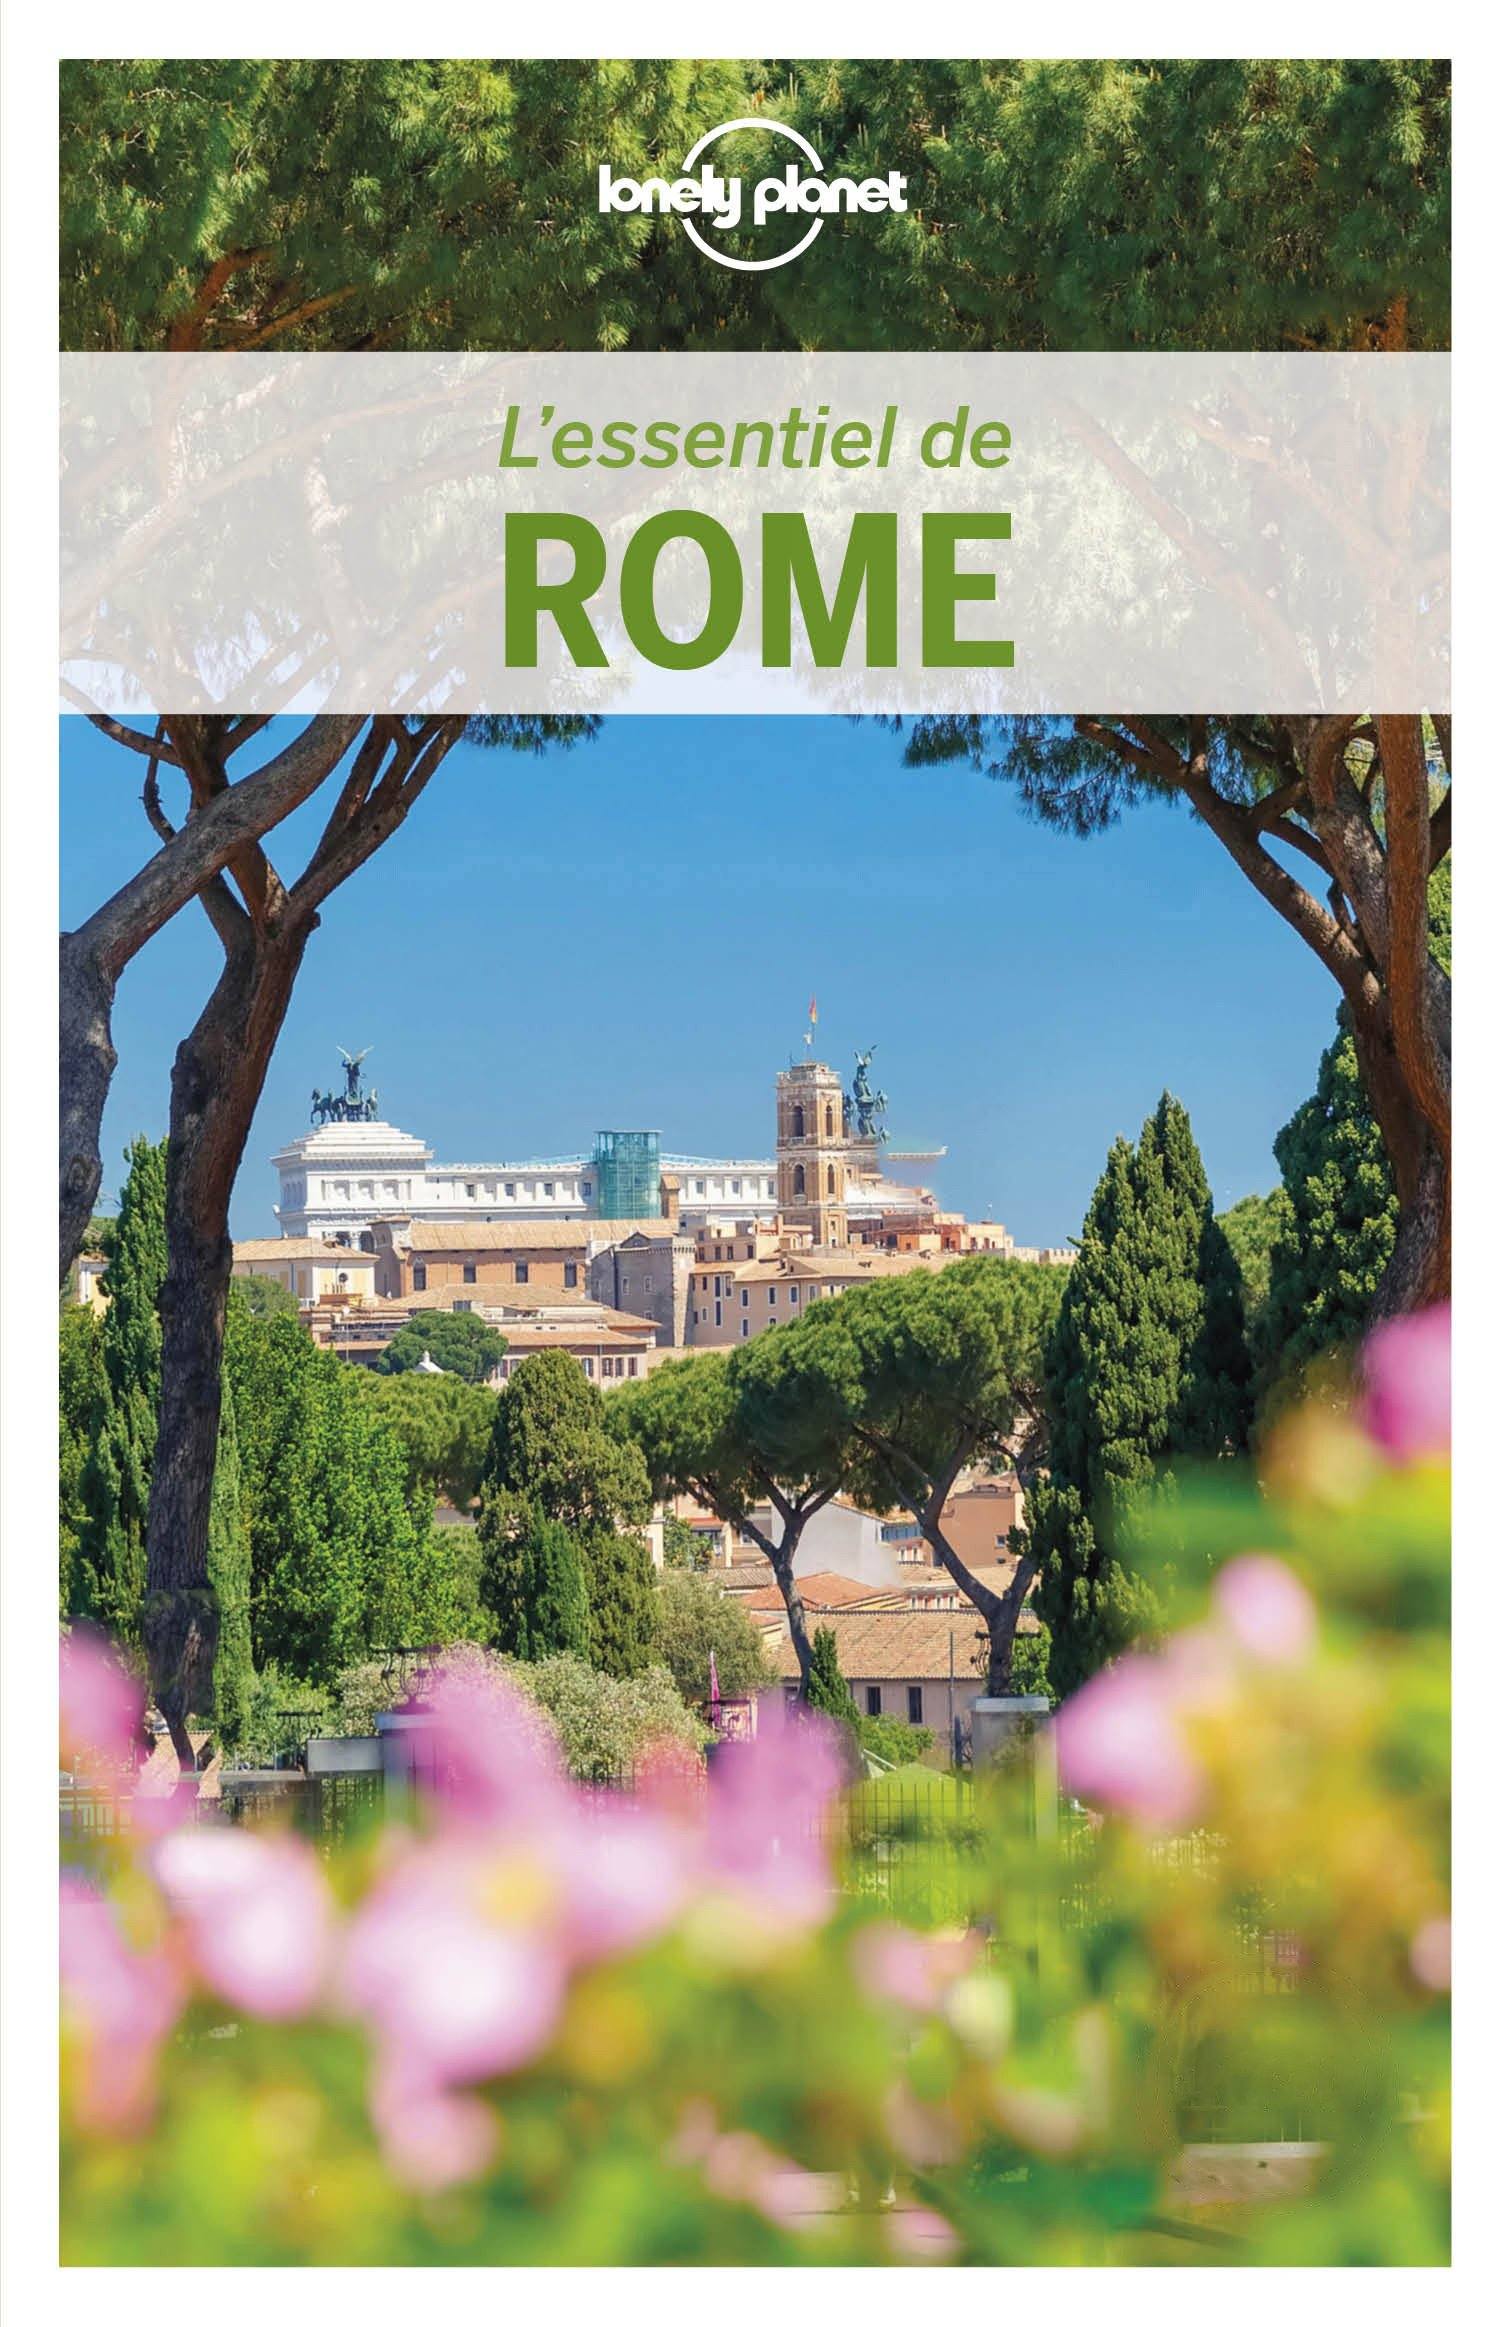 Lonely　–　Travel　and　Travel　Edition　Rome　MapsCompany　Guide　2020　The　maps　Essentials　of　Planet　hiking